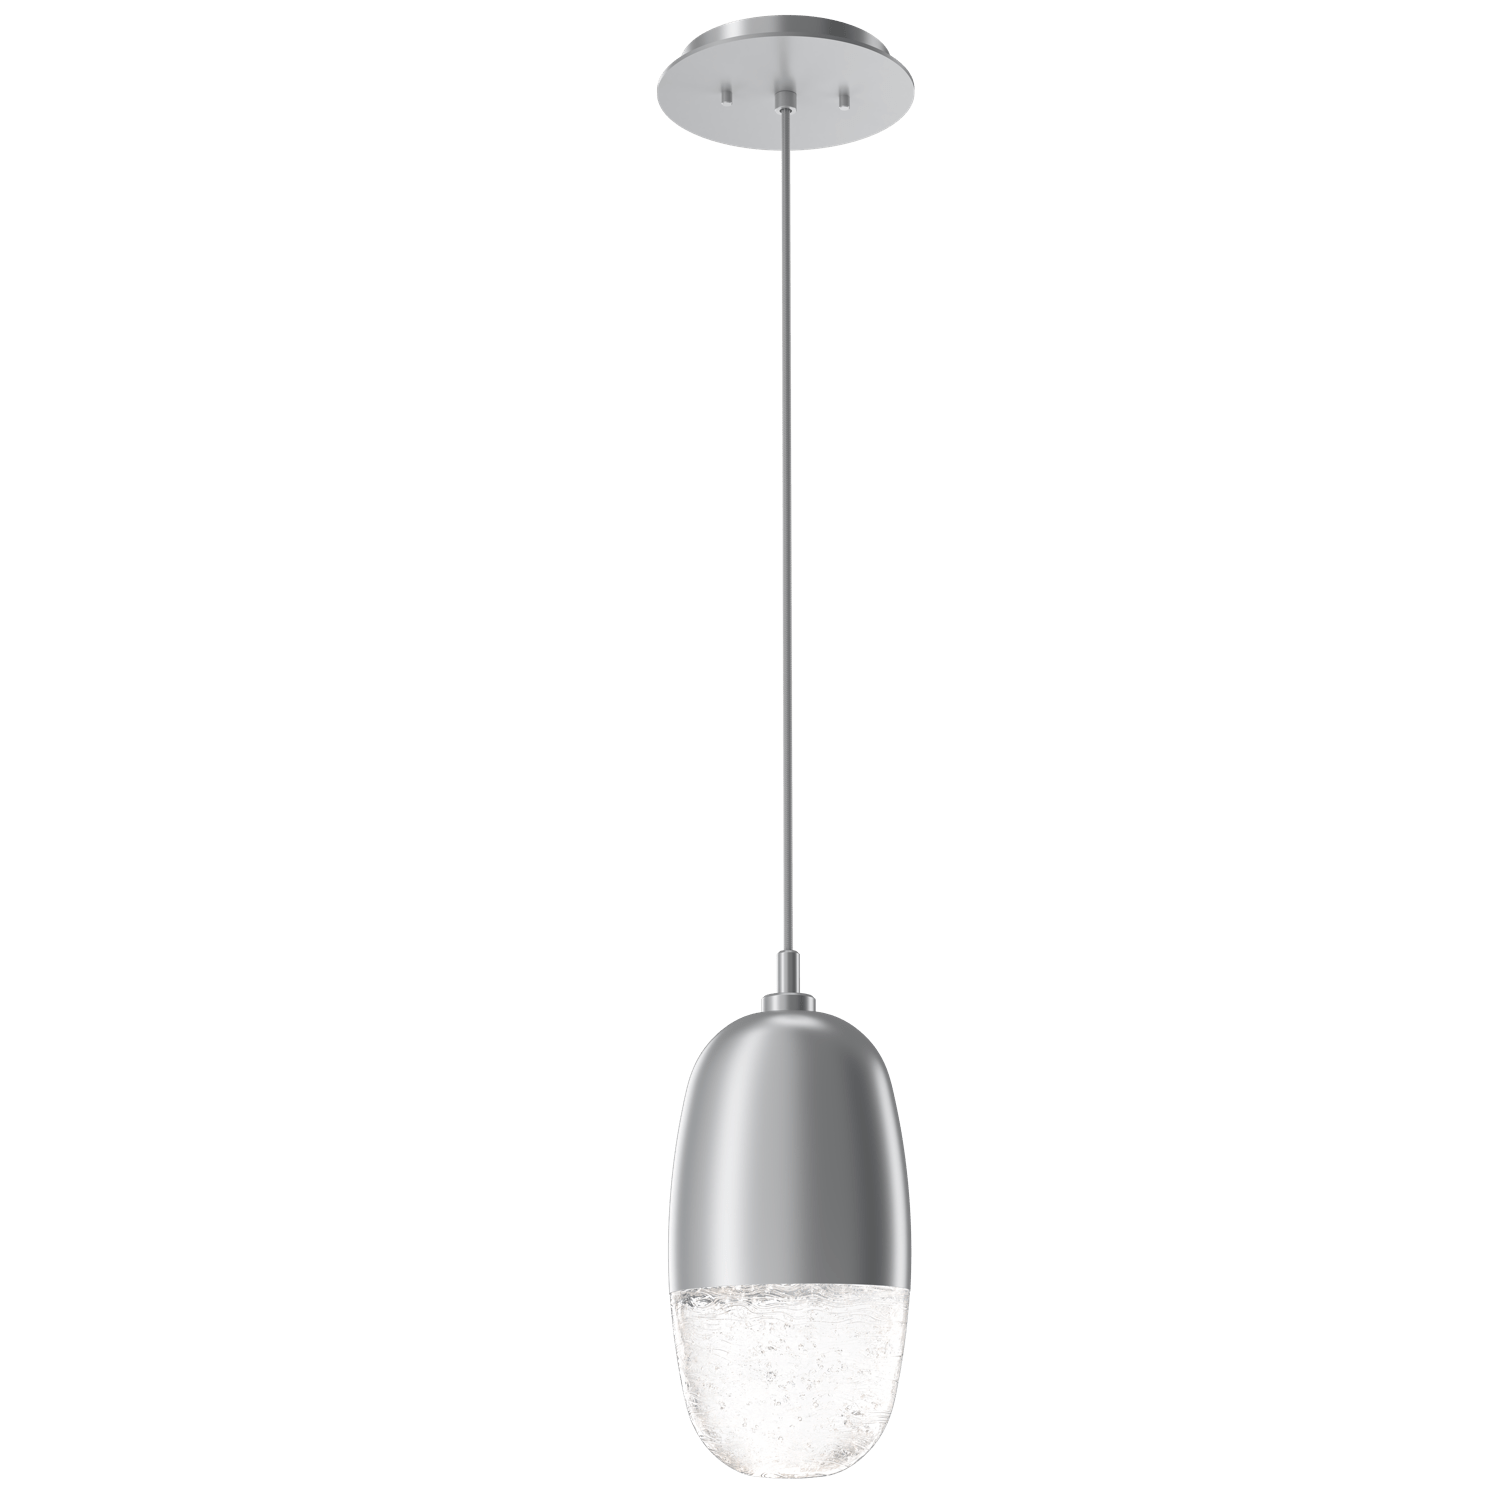 LAB0079-01-CS-Hammerton-Studio-Pebble-pendant-light-with-classic-silver-finish-and-clear-cast-glass-shades-and-LED-lamping